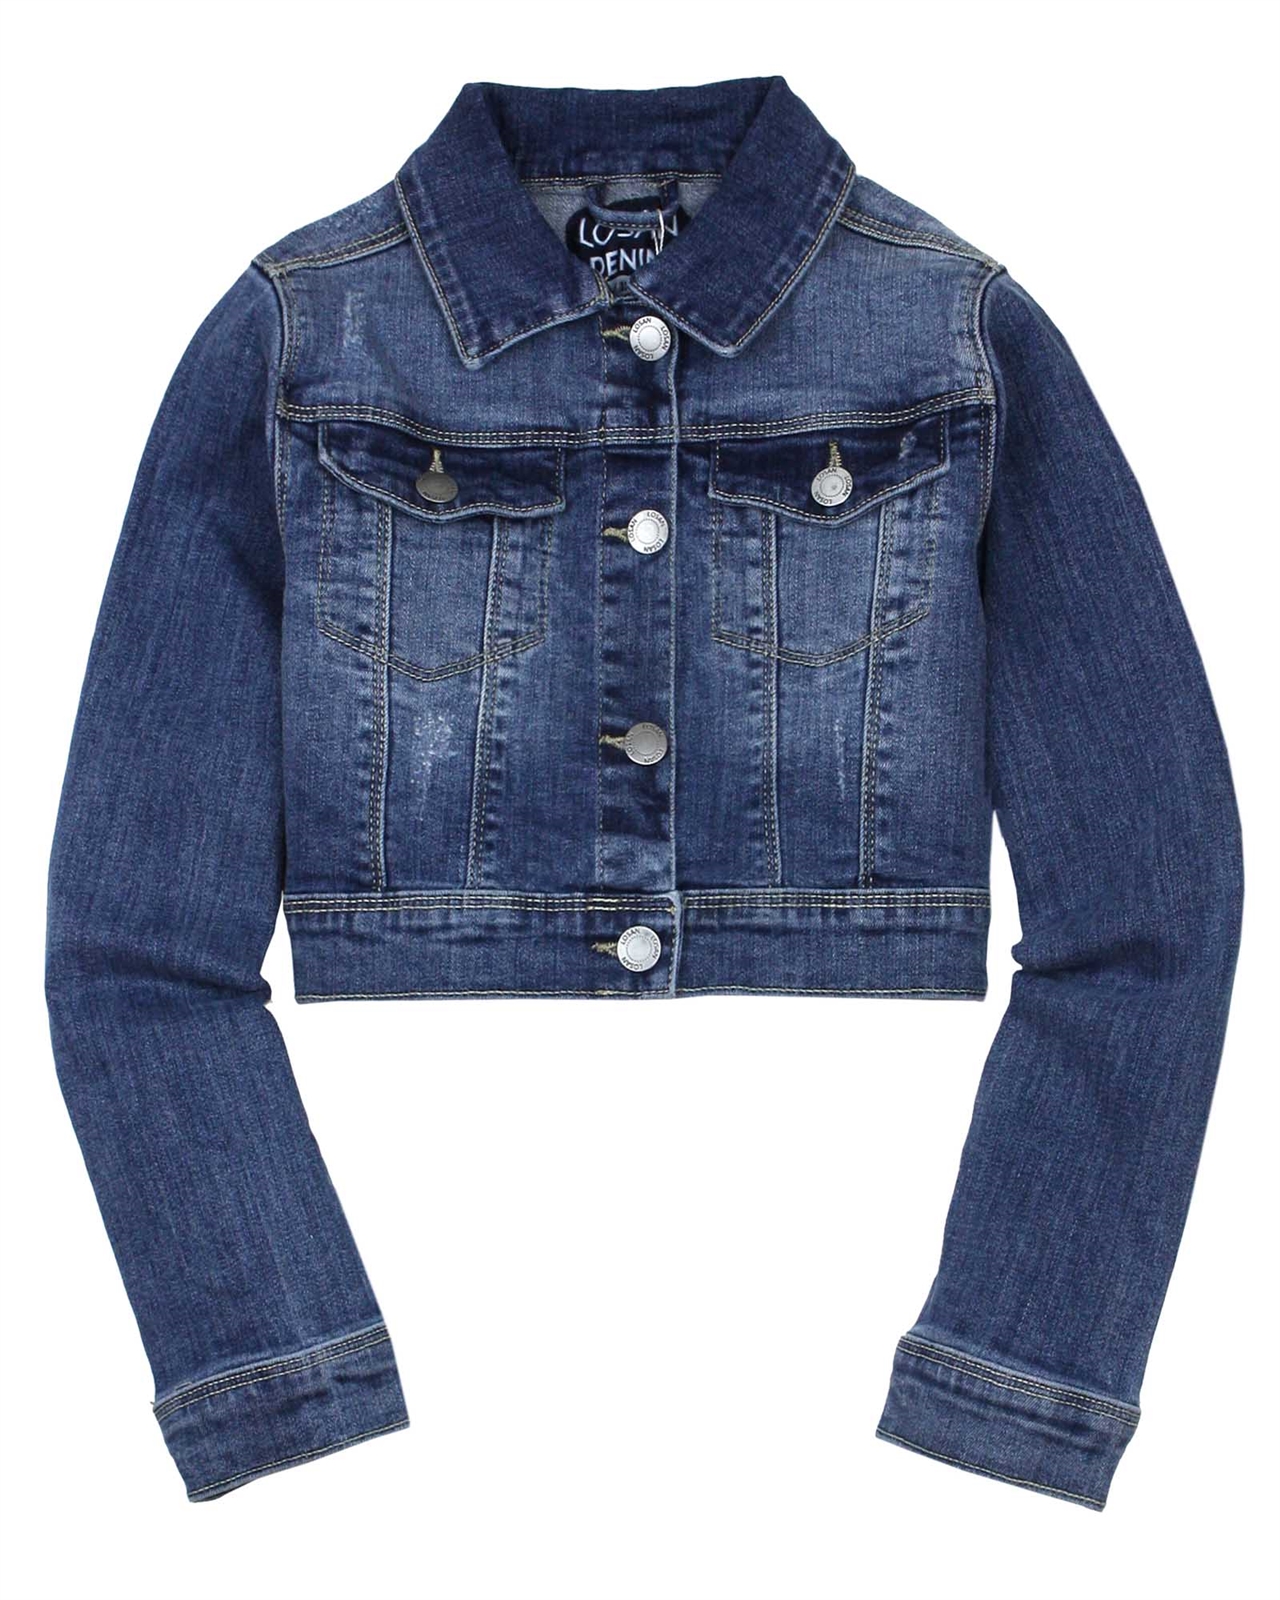 Kids Girl's Jacket Vacation Blouses Turn-Down Outerwear With Pocket Jean  Tops | eBay